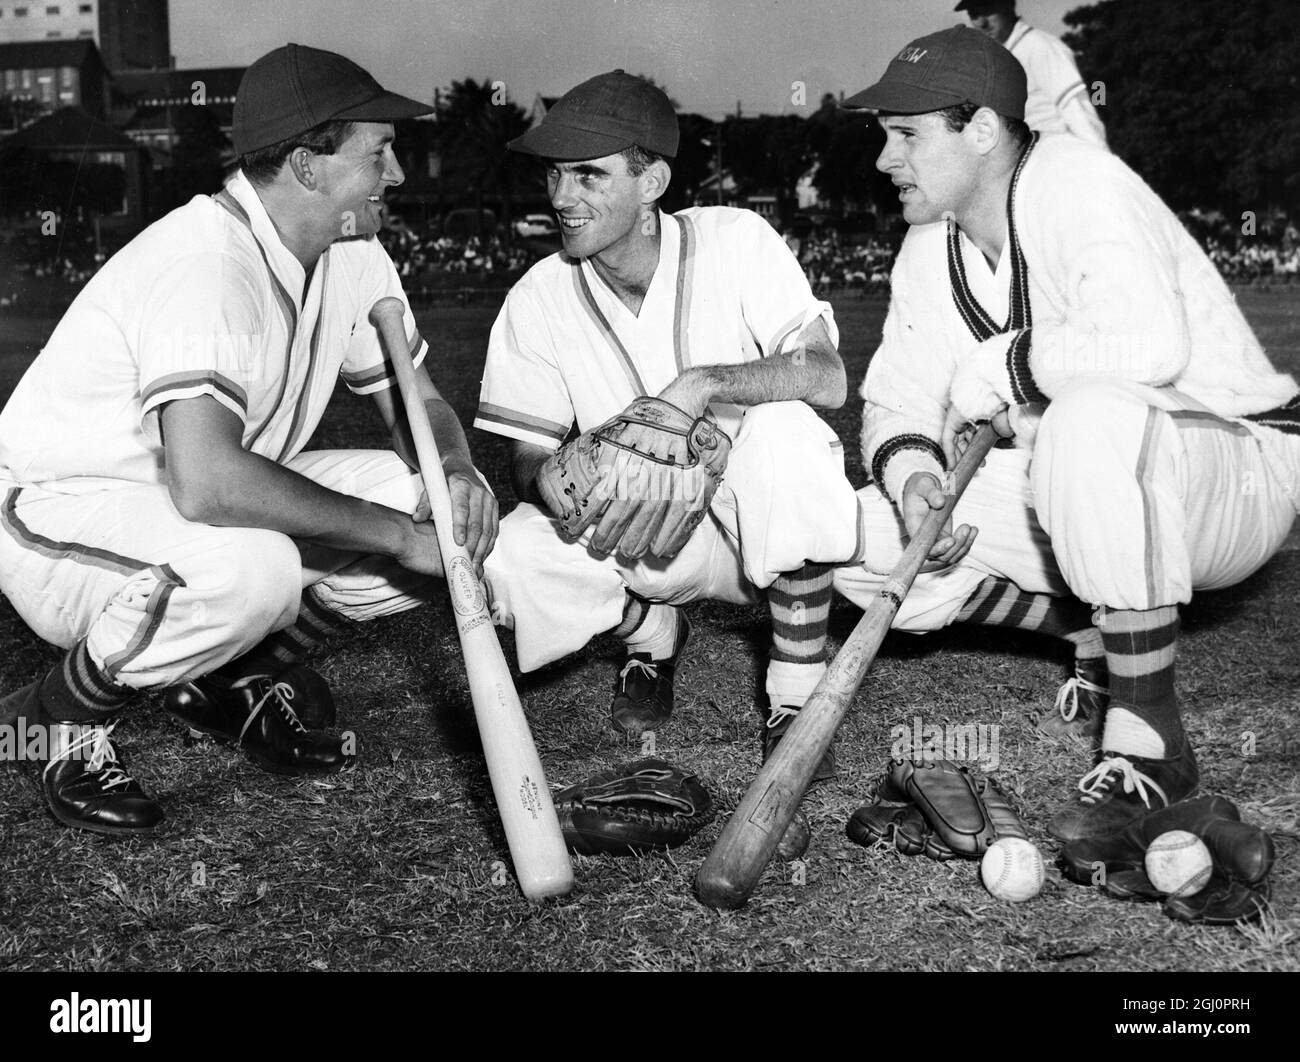 Cricket heroes and now baseball too. Australian Richie Benaud (left) , Ian Craig and Norm O'Neill are quite at home on the baseball pitch . Here, they plan their attack before beating the New South Wales baseball team . The cricketers won by 5 to 1 . Only a few weeks ago , Benaud led Australia to victory over England in a series of five test matches . O'Neill was invited to join the New York Yankees in Spring training but decided against it . 27 April 1959 Stock Photo